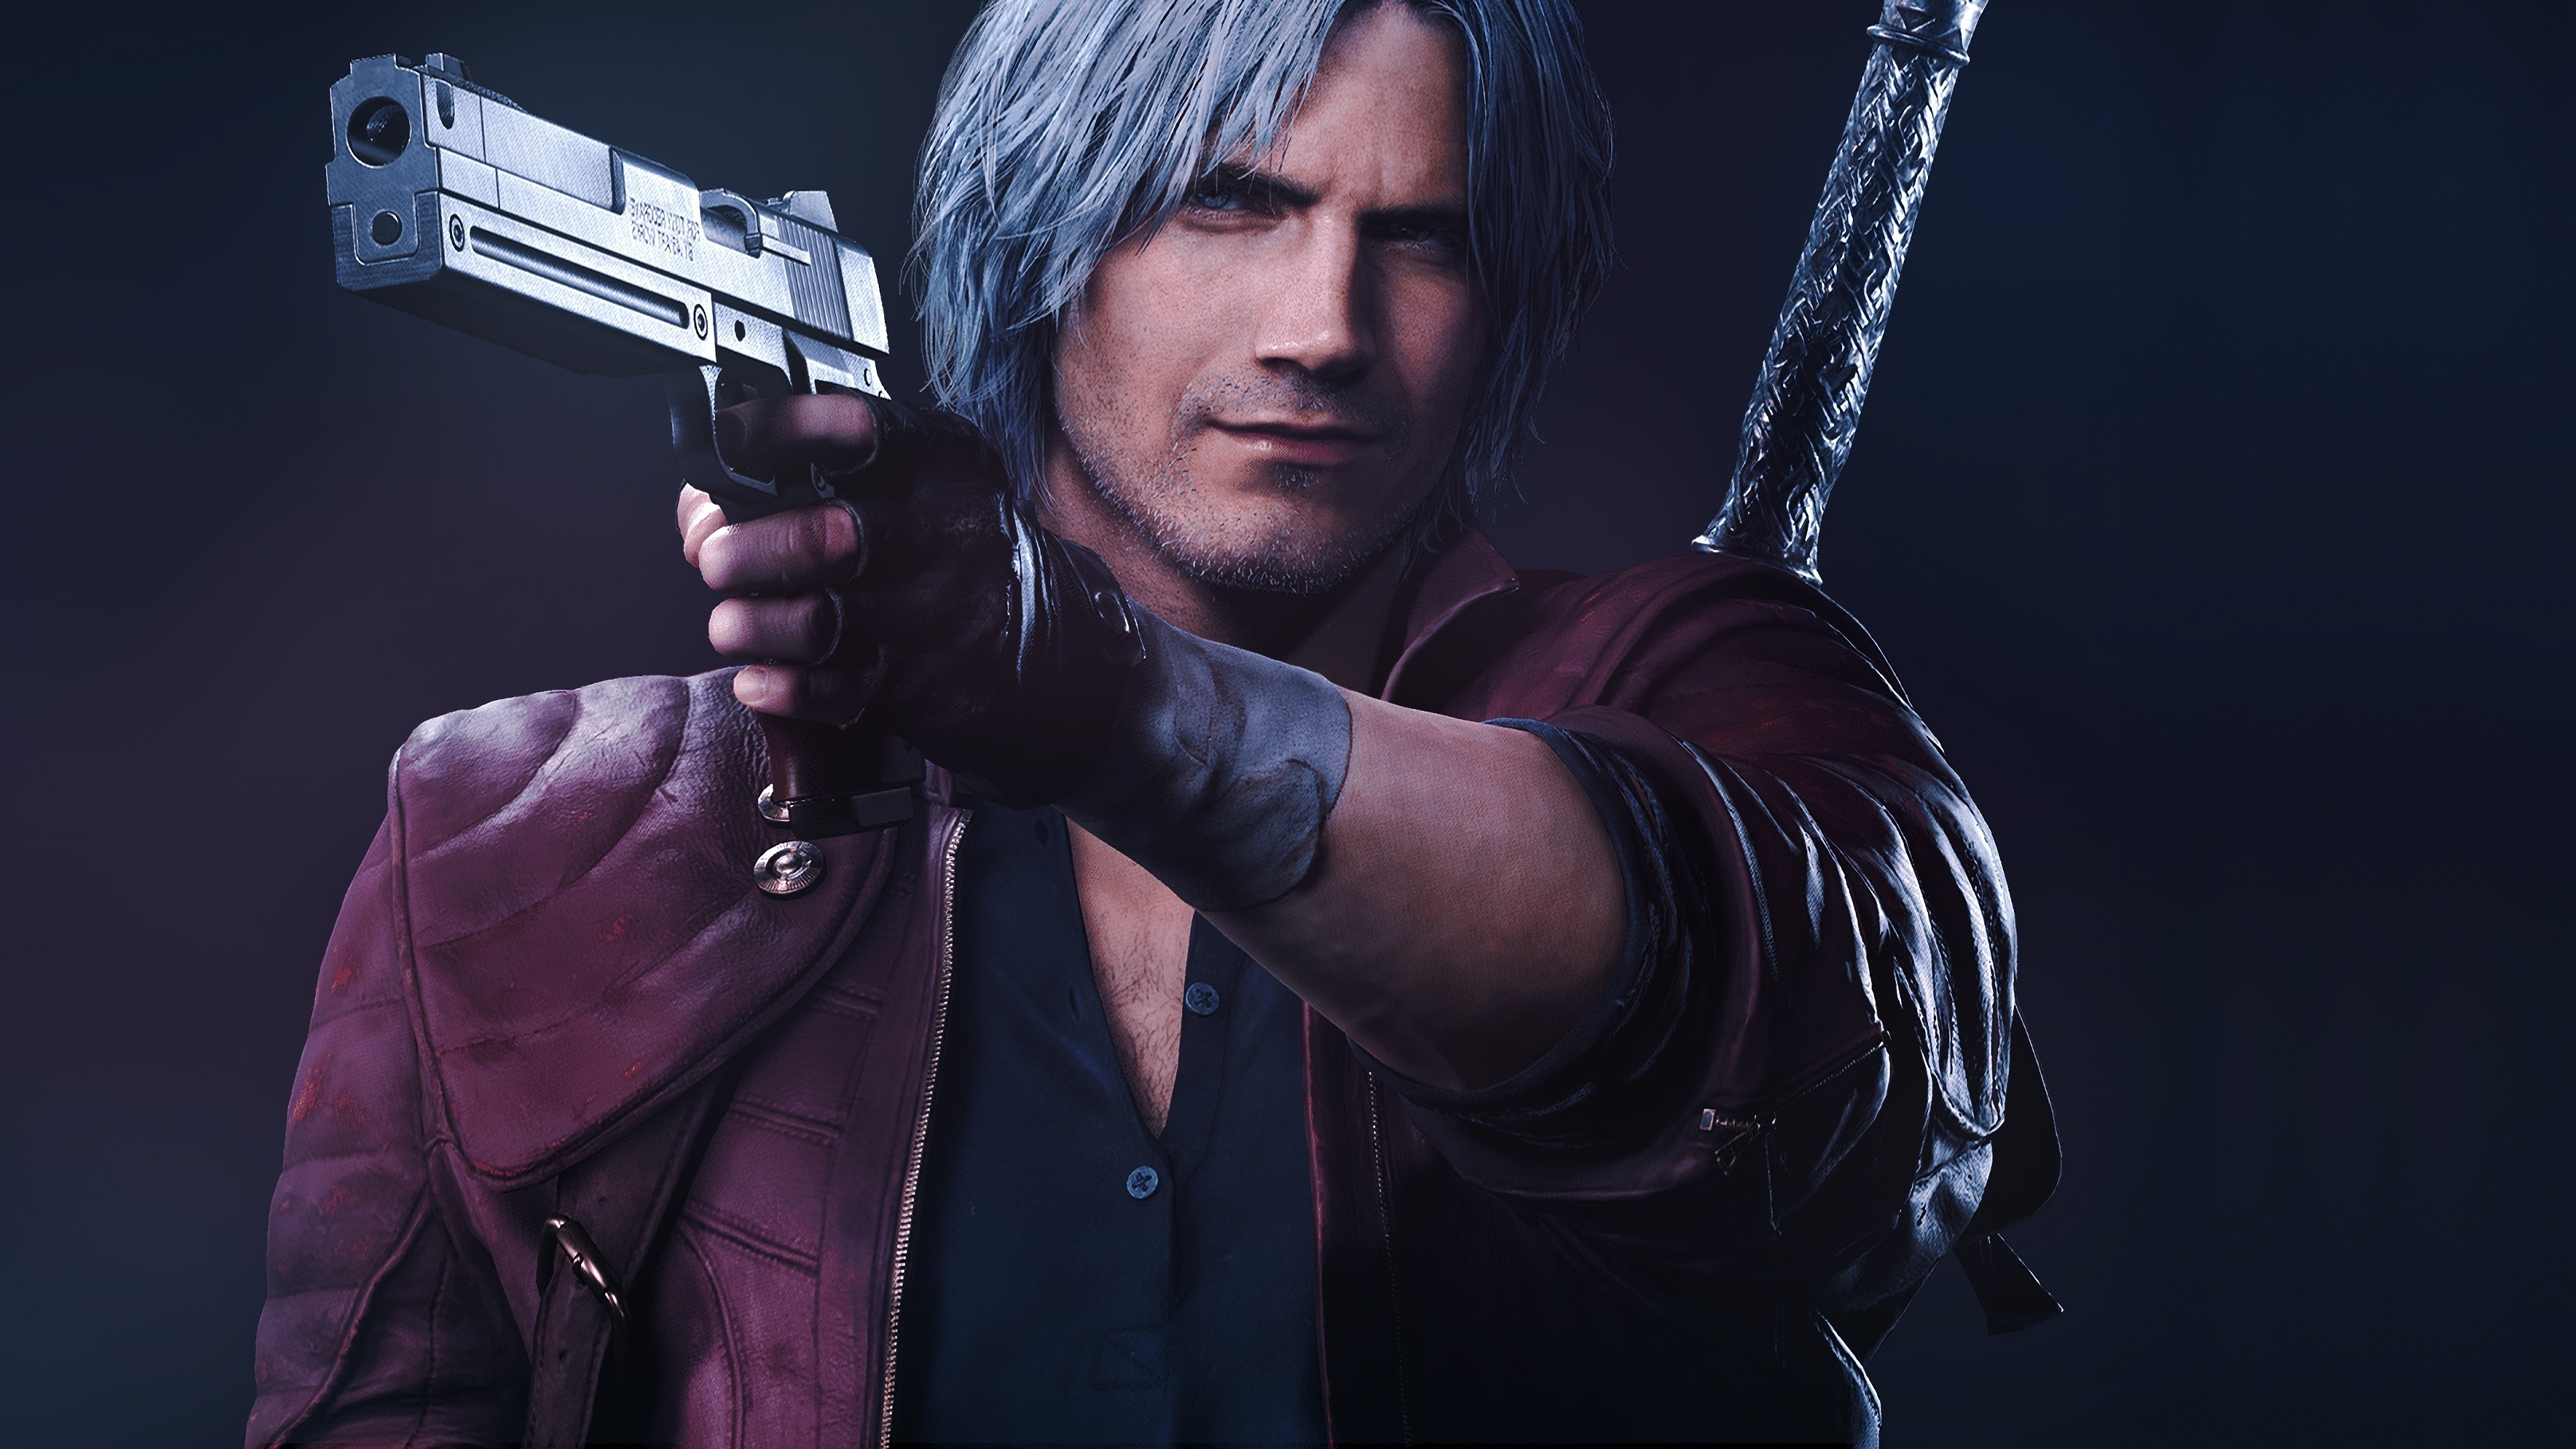 Games devil may cry. Данте Devil May Cry. Данте ДМС 5. Данте девил май край 5. Devil May Cry 5 Dante.